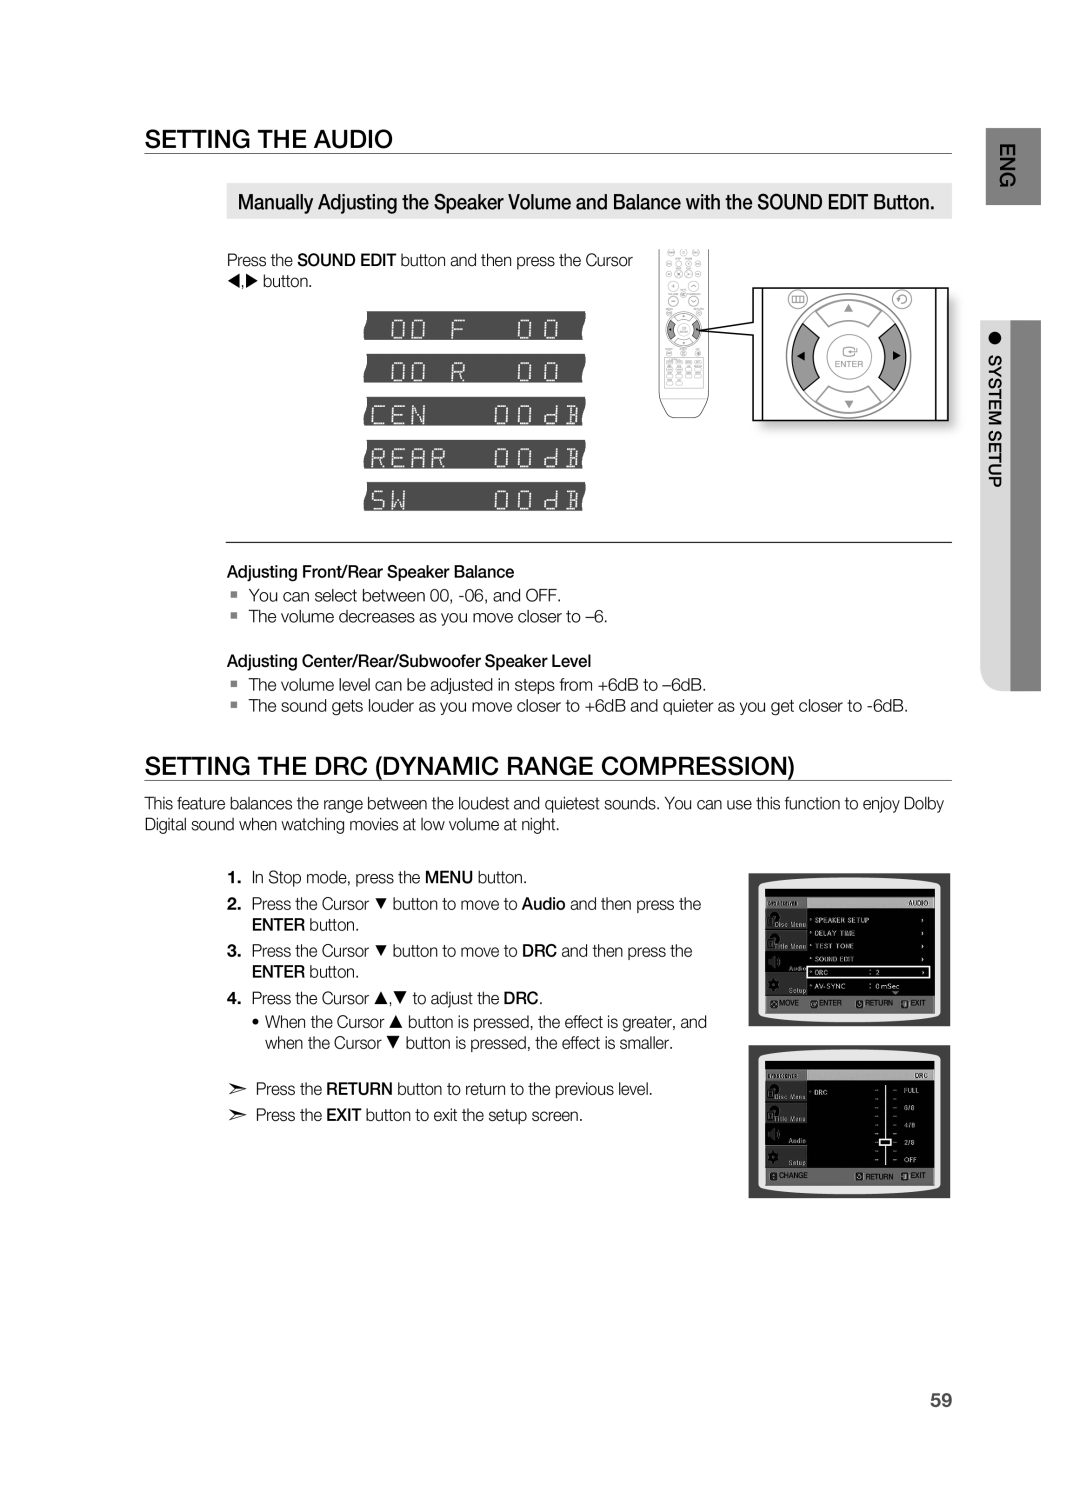 Samsung HT-TZ515 user manual SETTINg THE AUDIO, SETTINg THE DrC DYNAMIC rANgE COMPrESSION 